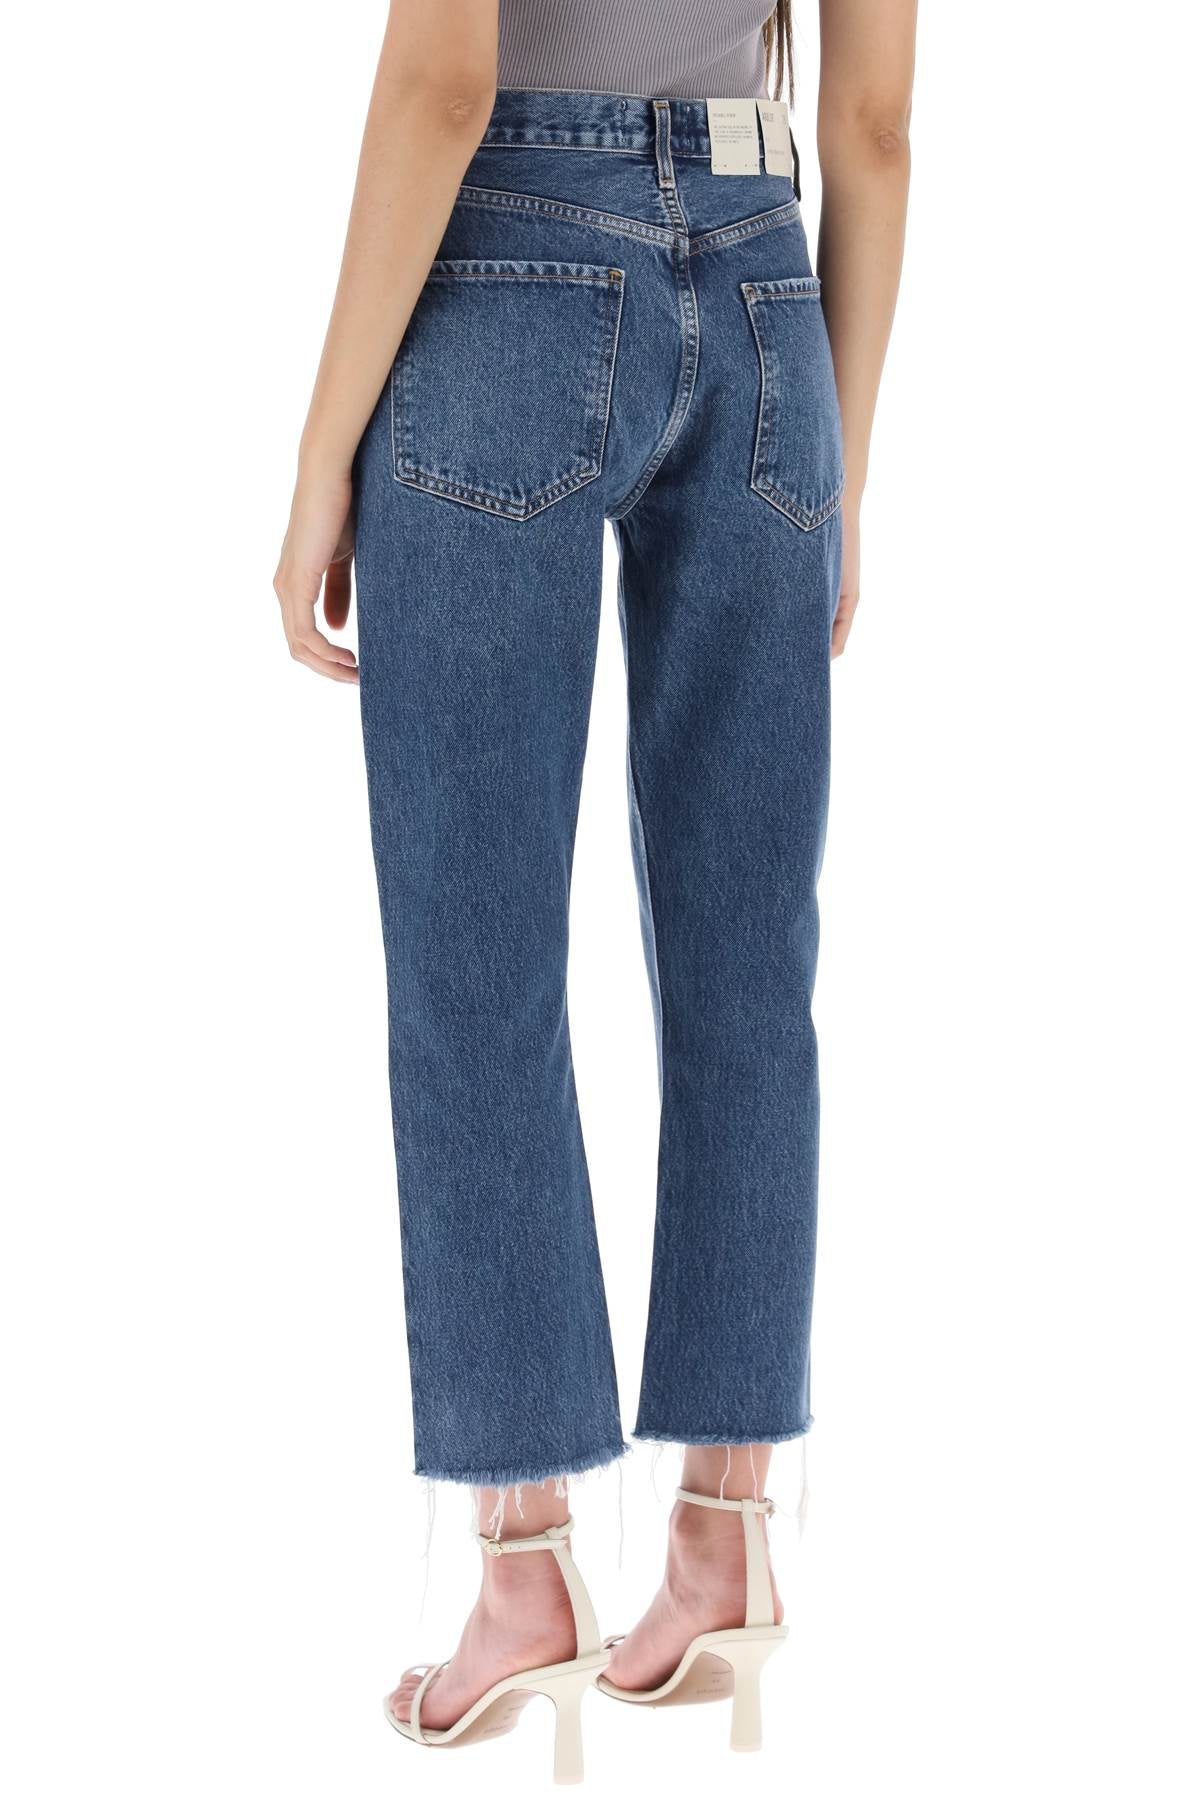 Agolde riley cropped jeans-2